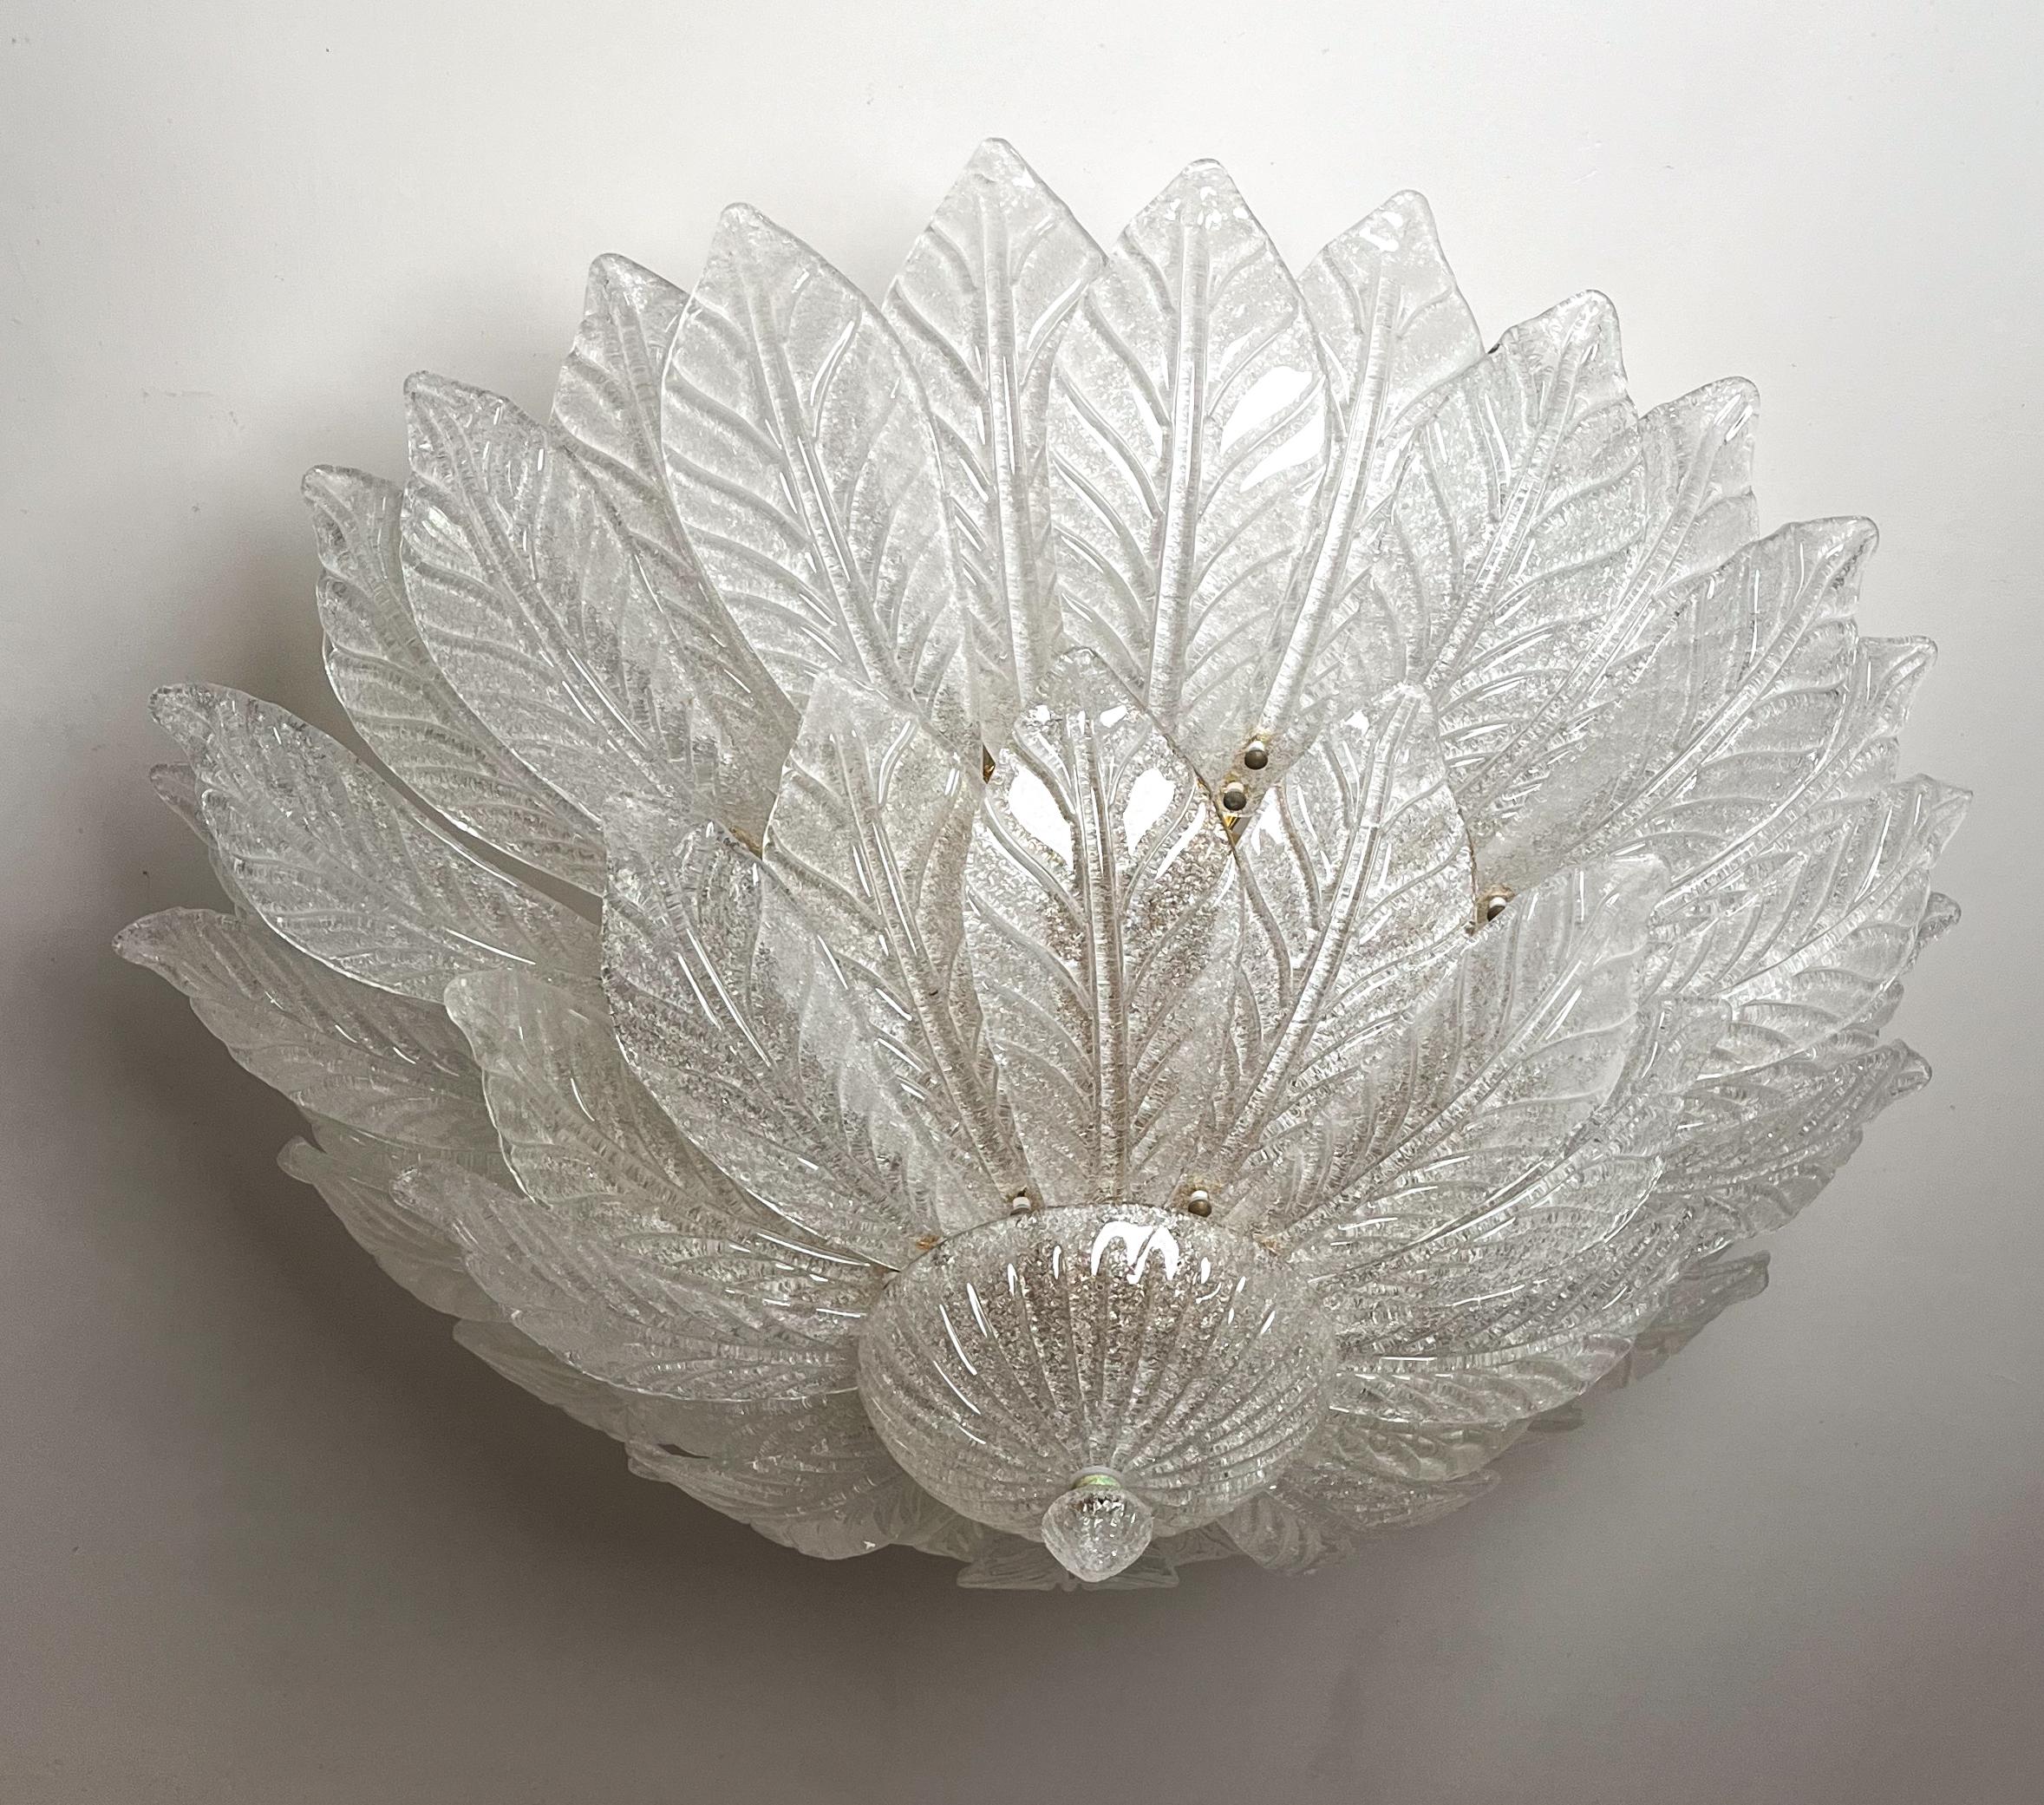 Set of 2 Large and elegant built-in Murano glass chandelier in neoclassical style, Italy, circa 1970s.
The Murano chandelier, in the Mid-Century Modern style, is composed of two layers of transparent leaf glass and a gold frame.
The two layers are